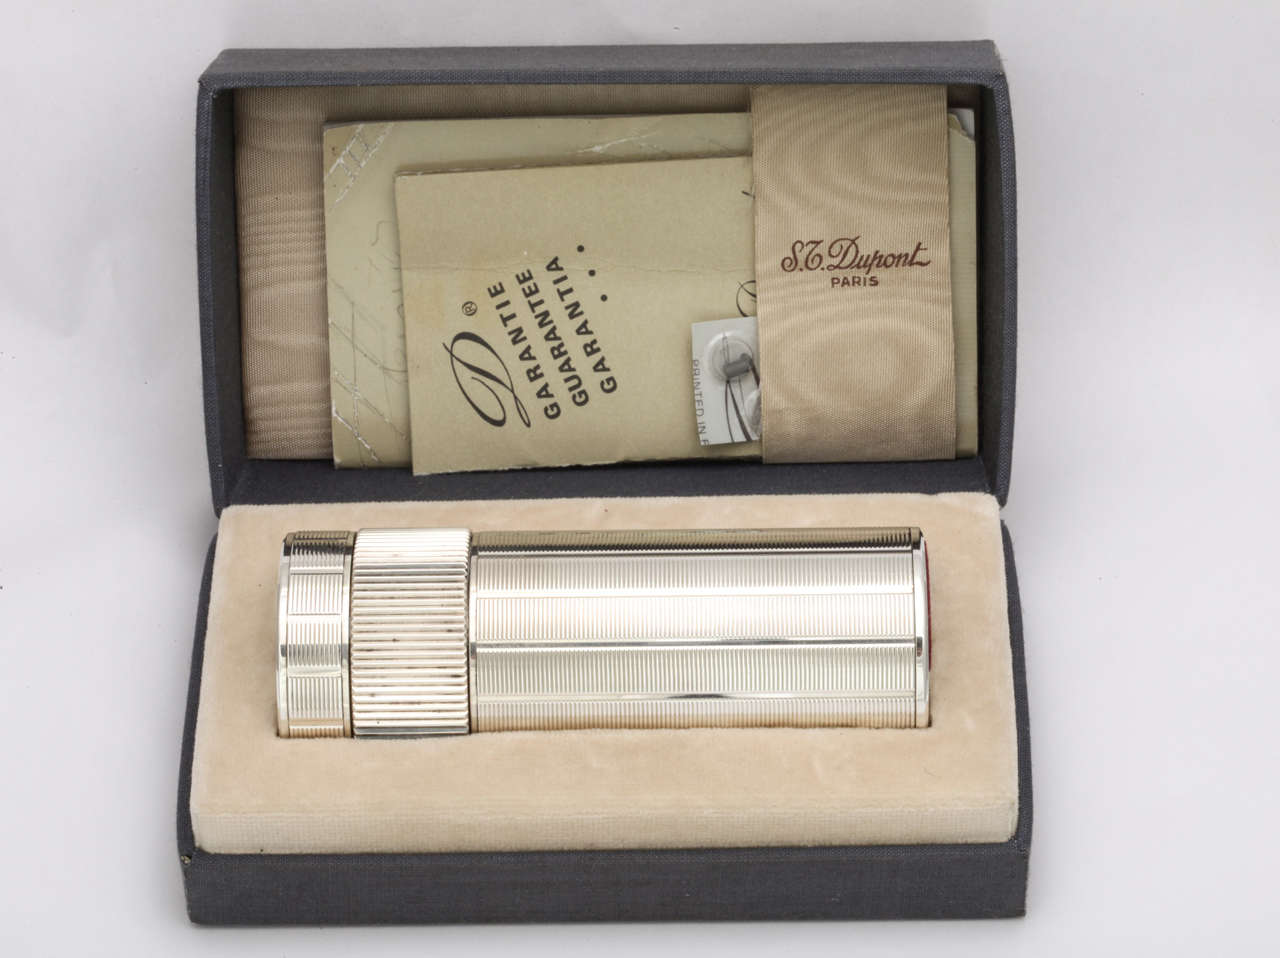 A nice silver plated table lighter by S.T. Dupont in the original fitted box. The engine turned detailing in a columnar design is quite striking and it contrasts nicely with the ridged wheel which rotates to light the flame. This lighter was